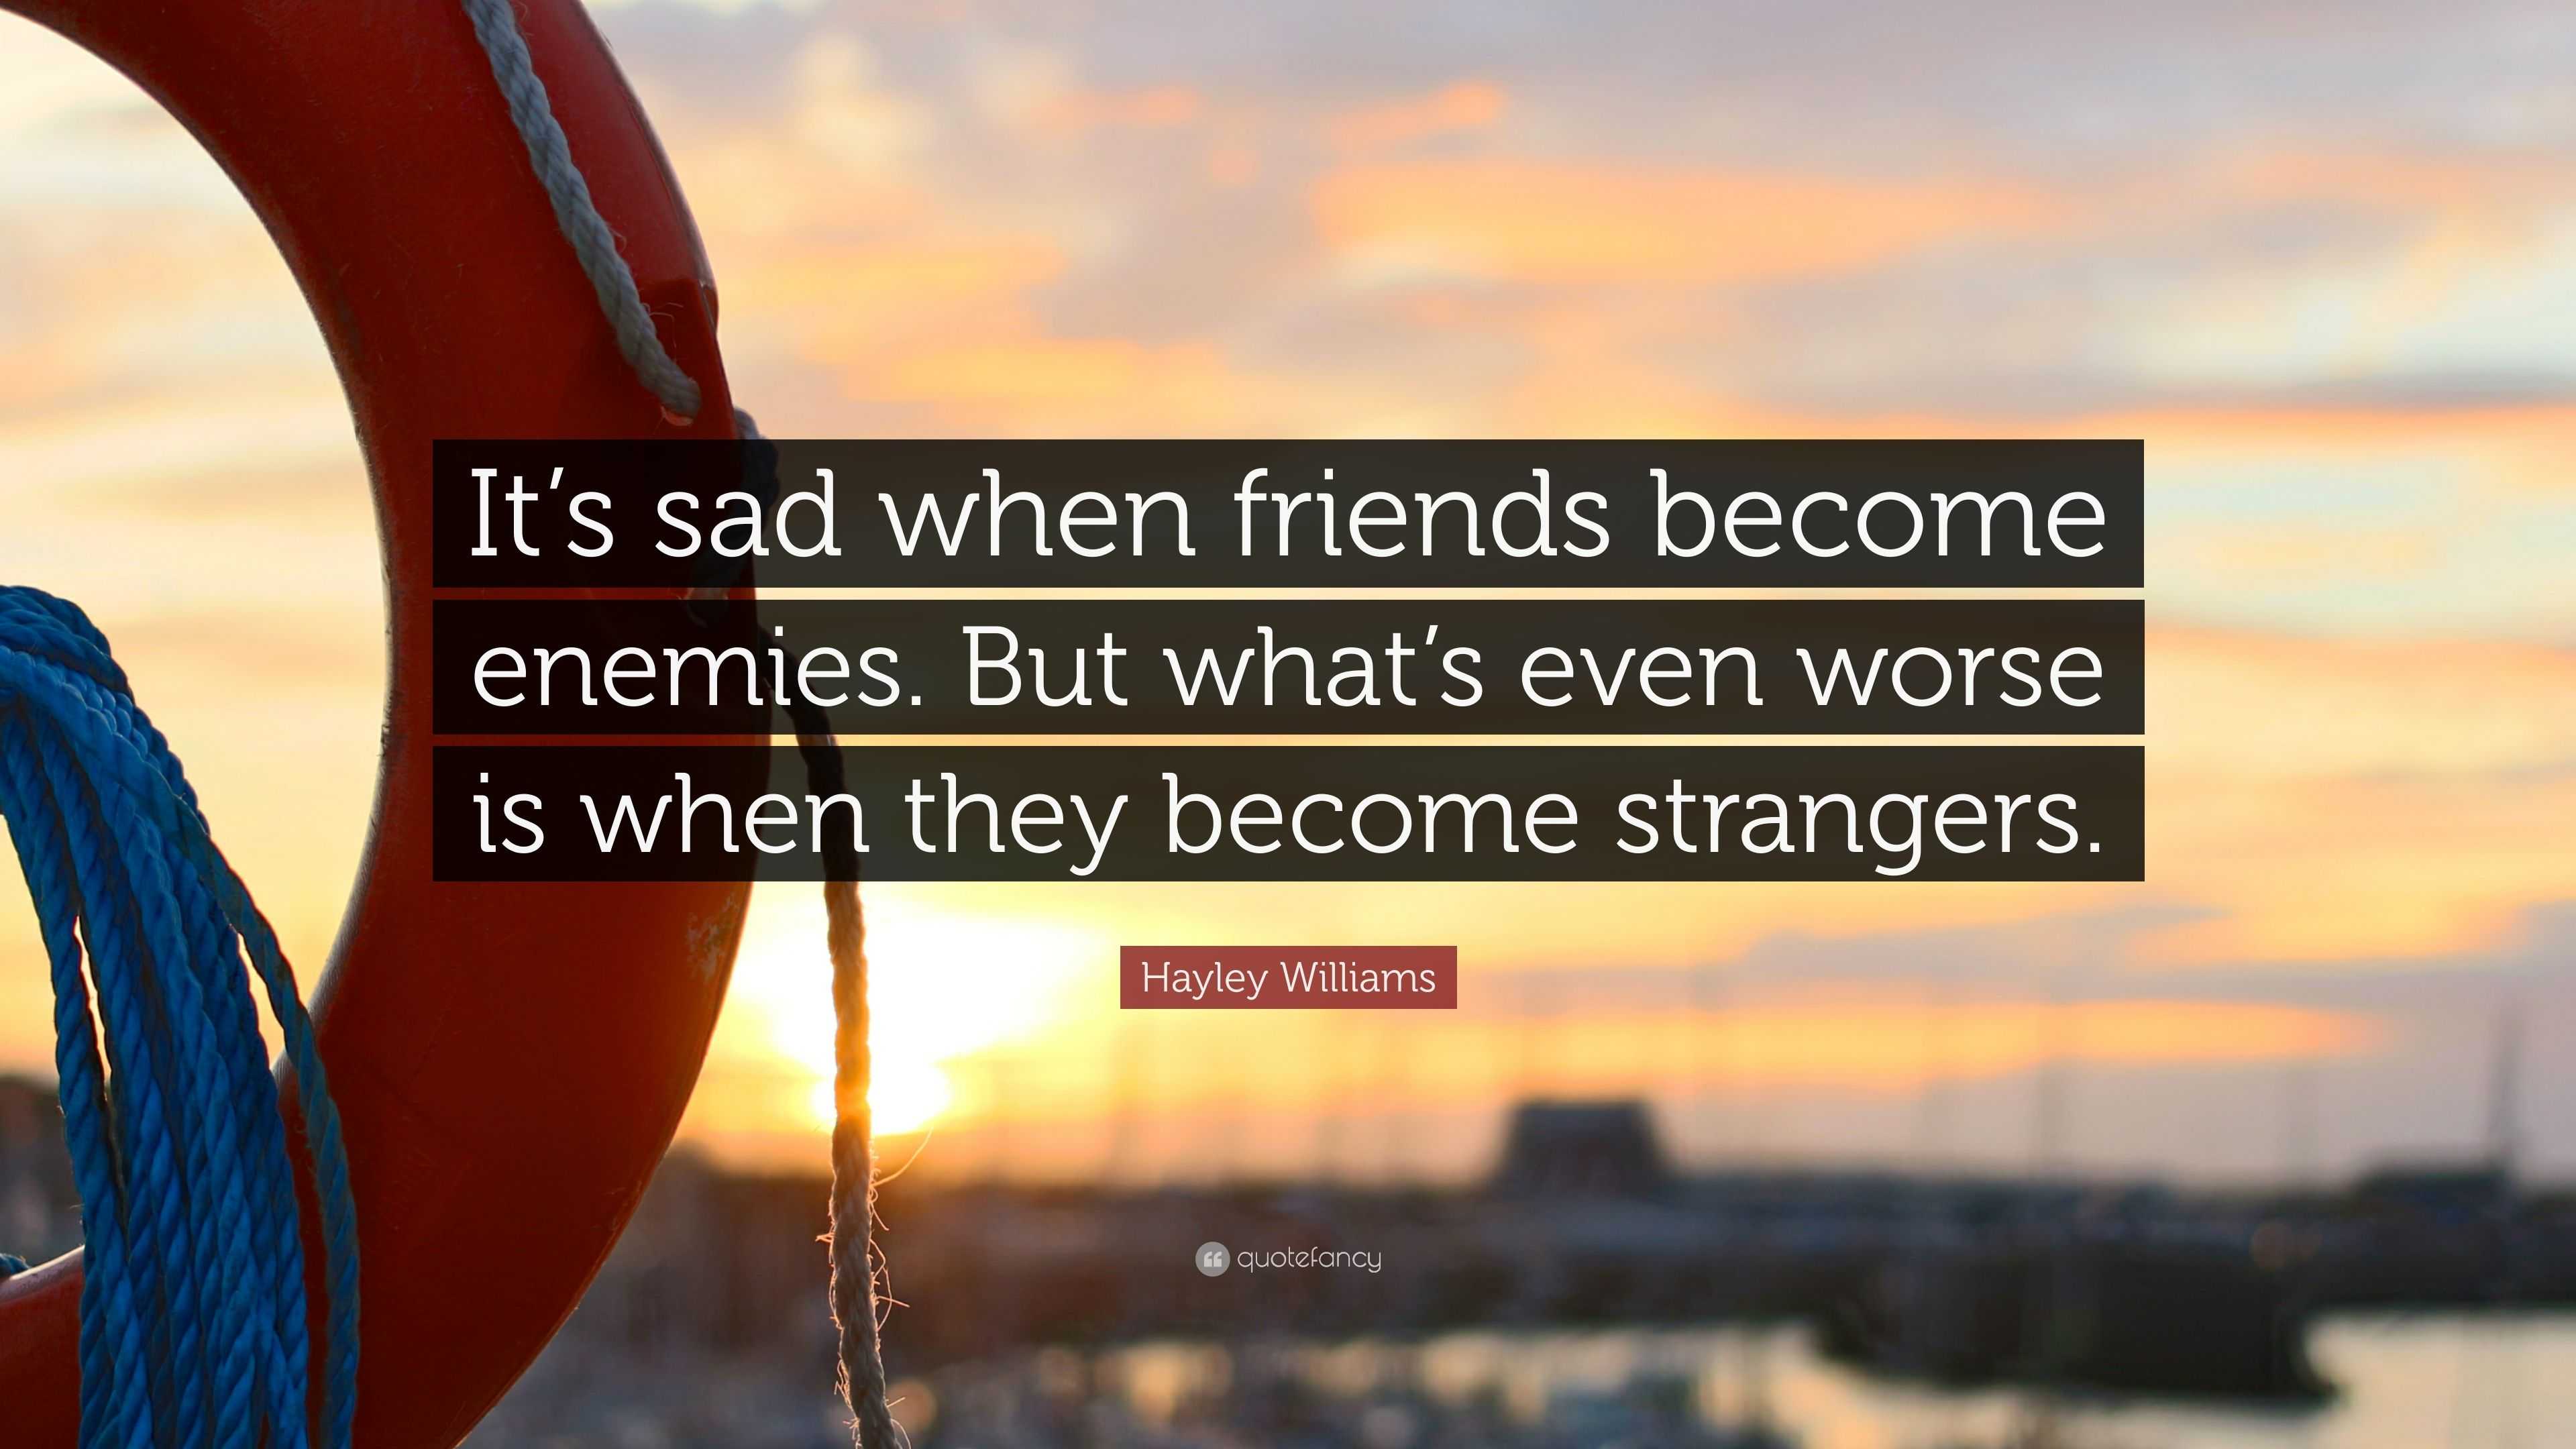 Hayley Williams Quote: “It's sad when friends become enemies. But what's  even worse is when they